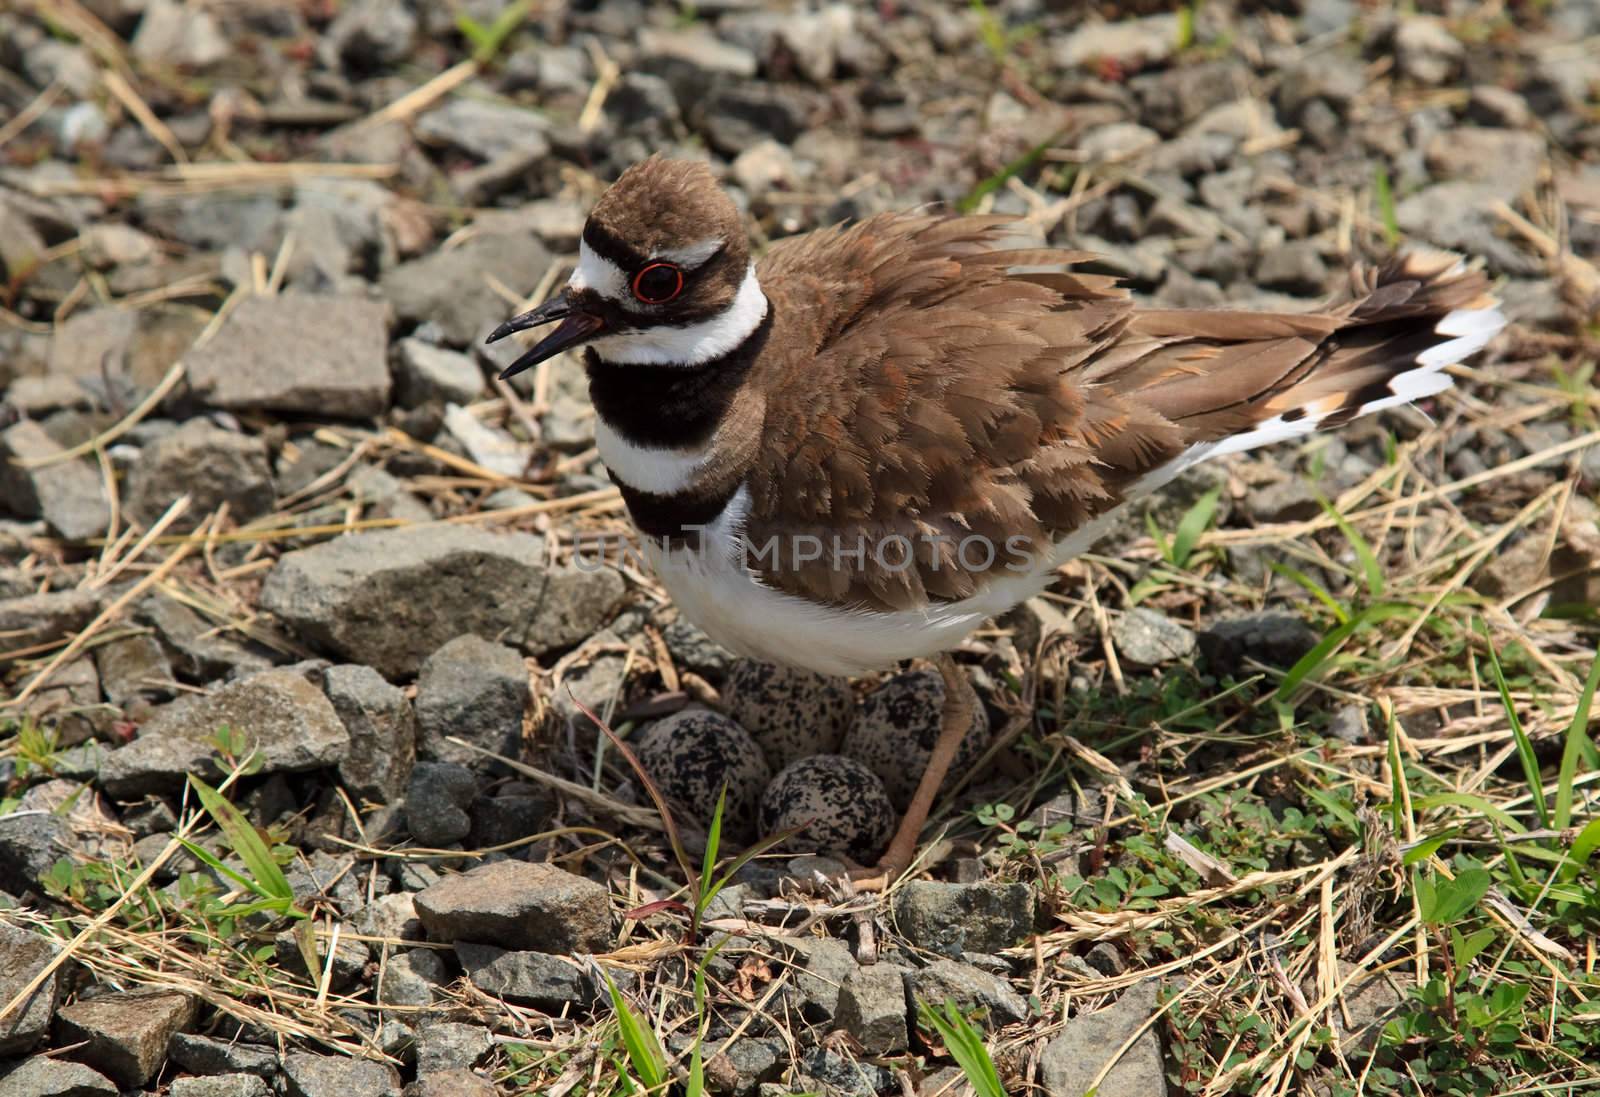 Close-up of Killdeer bird by nest by steheap